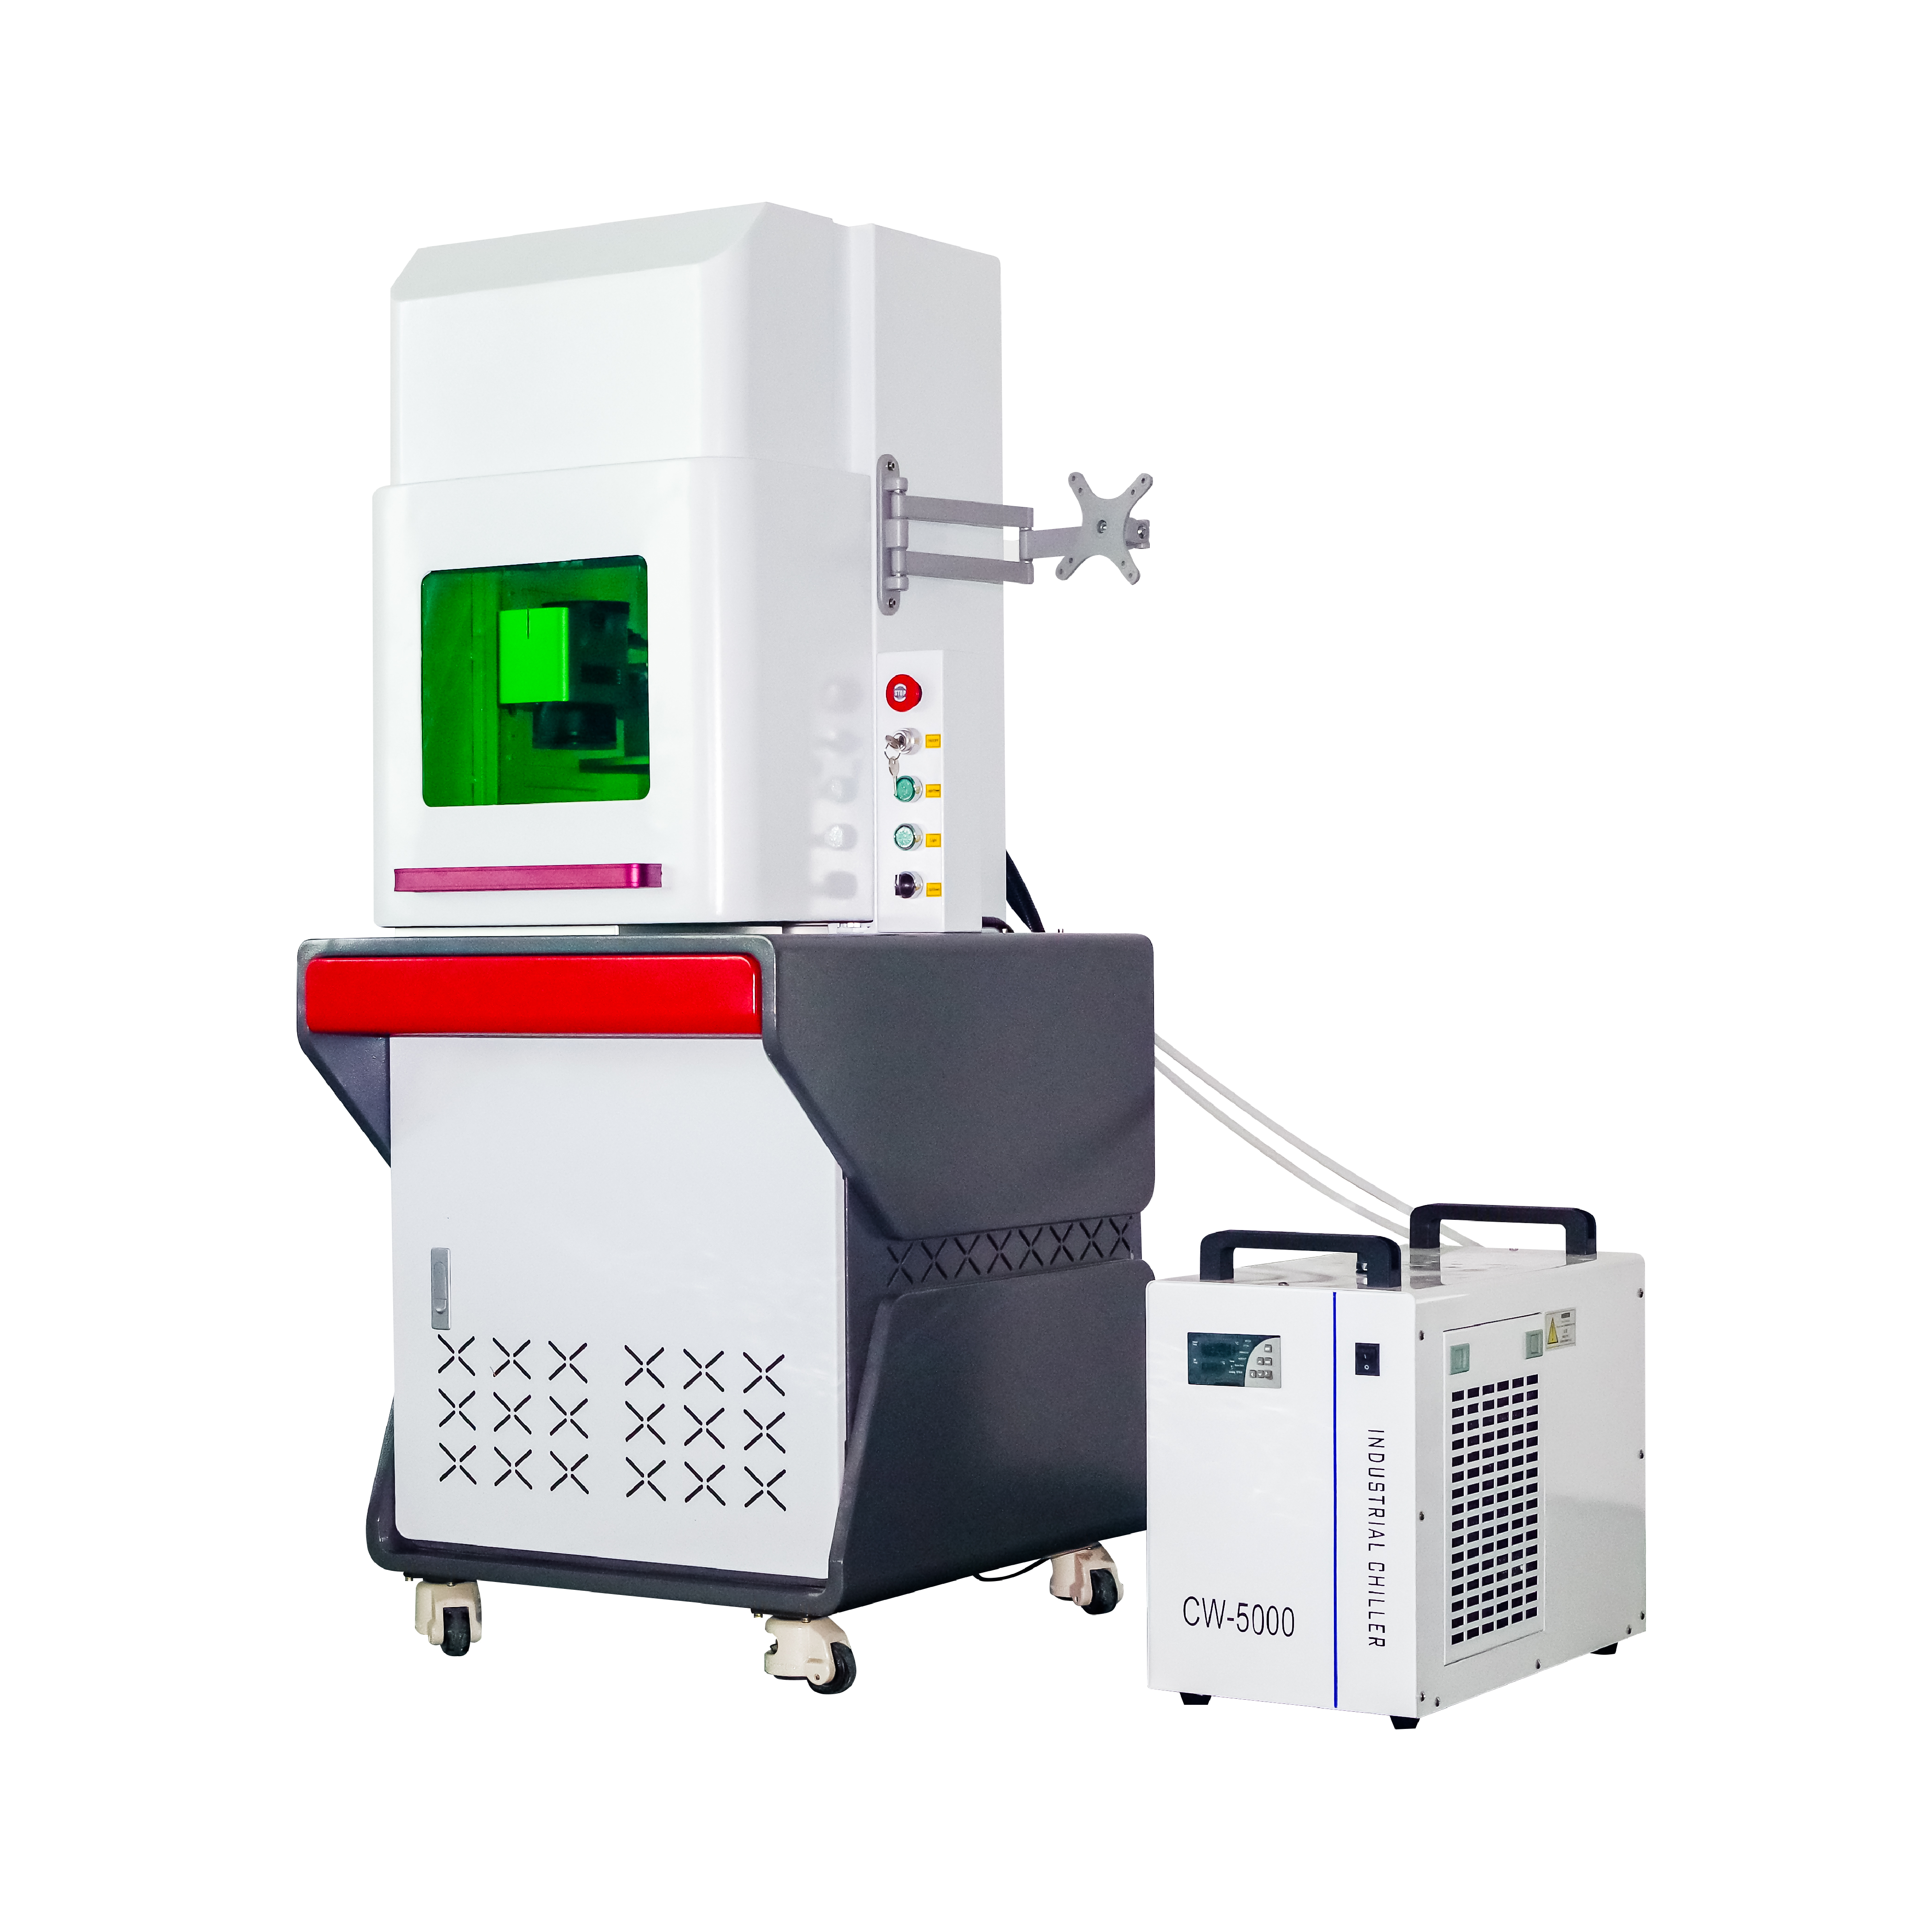 High precision enclosures closed 3w 5w 10w UV laser marking machine for PCB glass plastic metal with emergency stop button